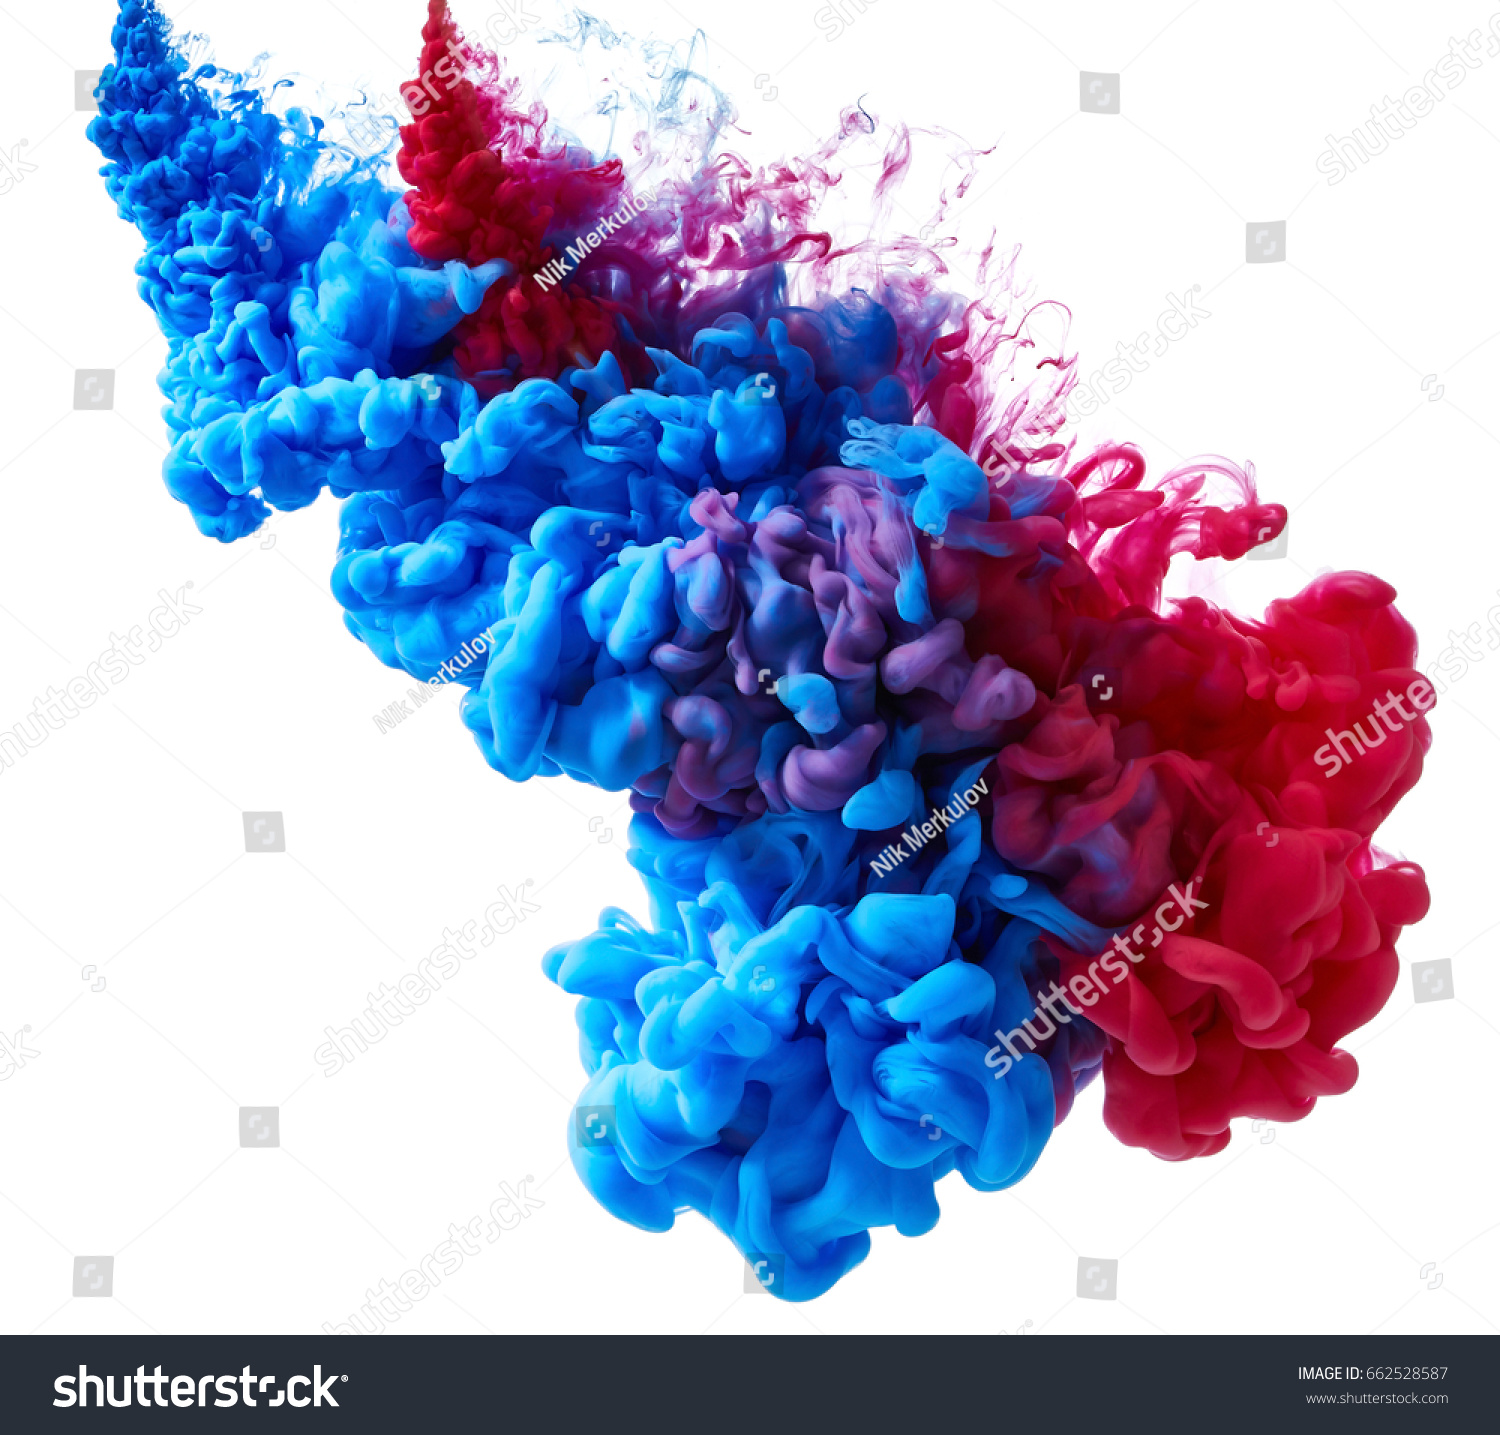 237,419 Red blue mix Images, Stock Photos & Vectors | Shutterstock